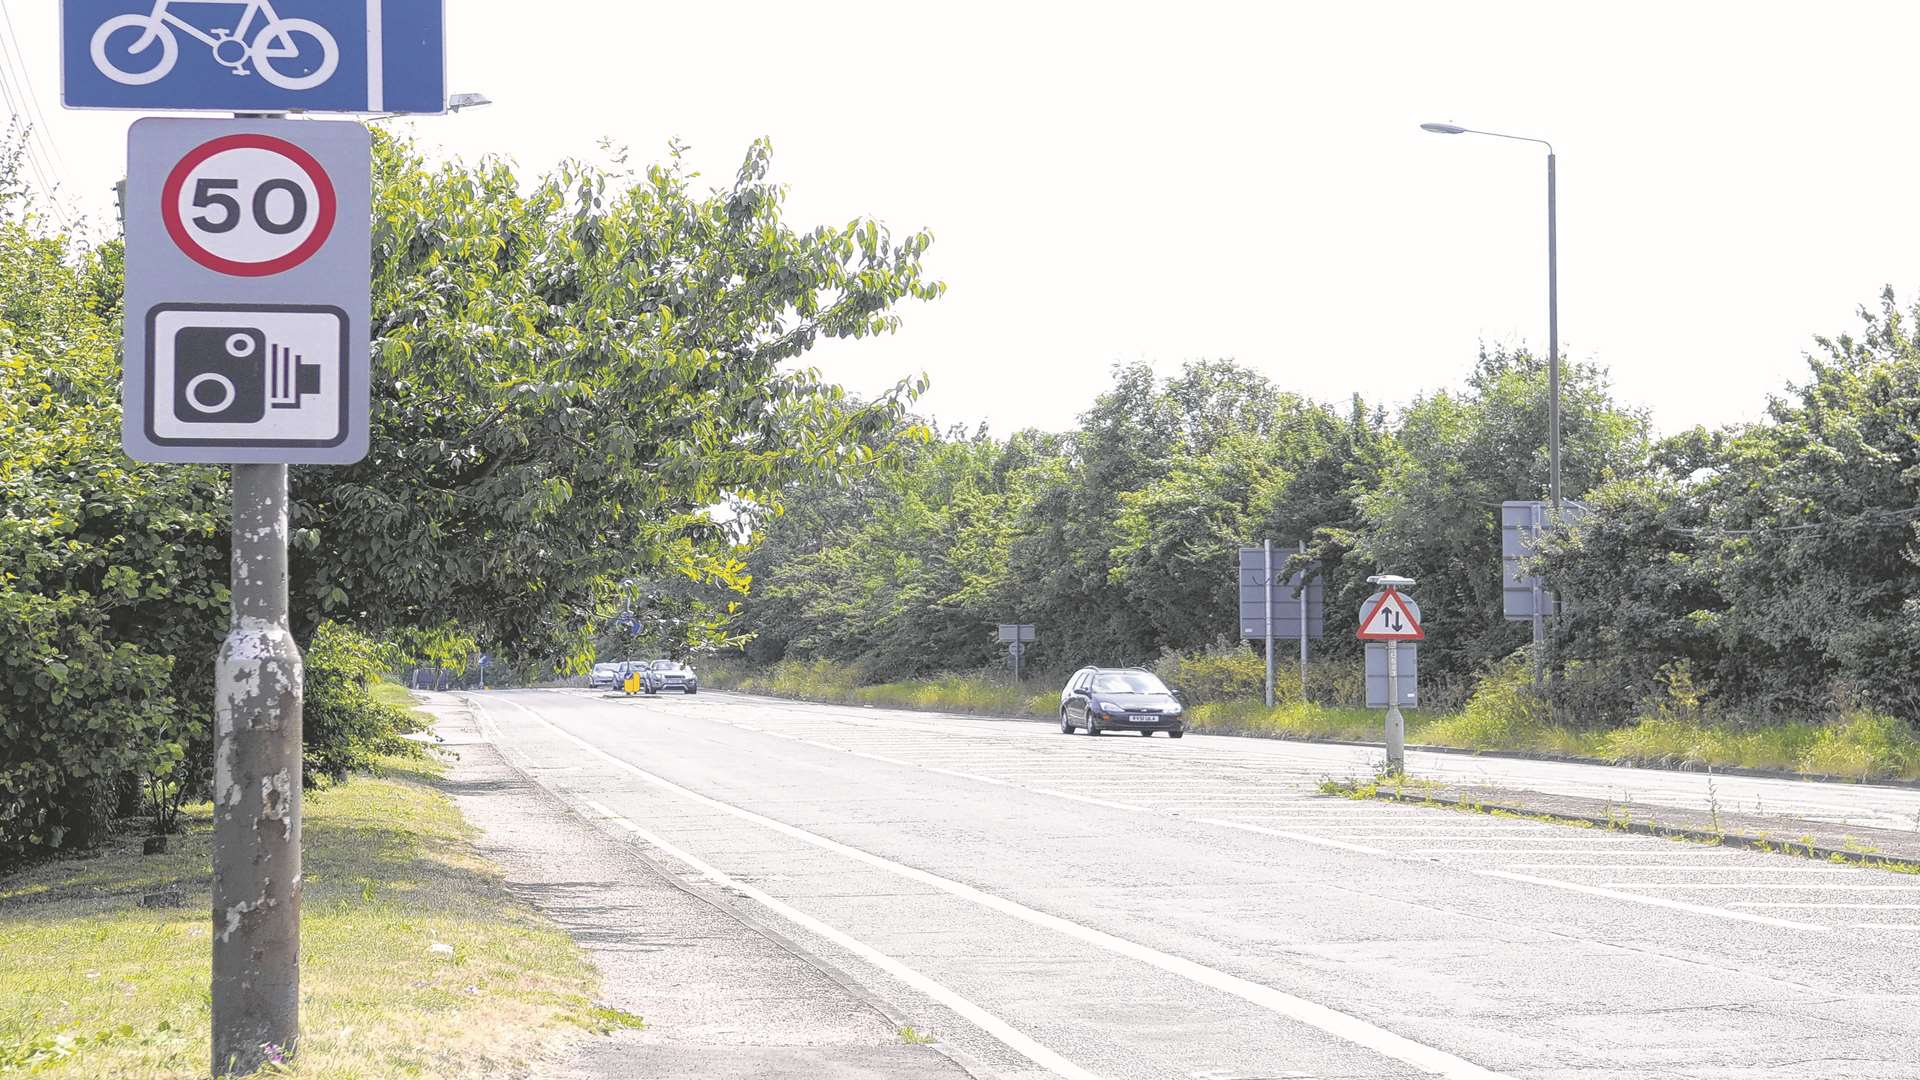 The A226 Gravesend Road, Shorne